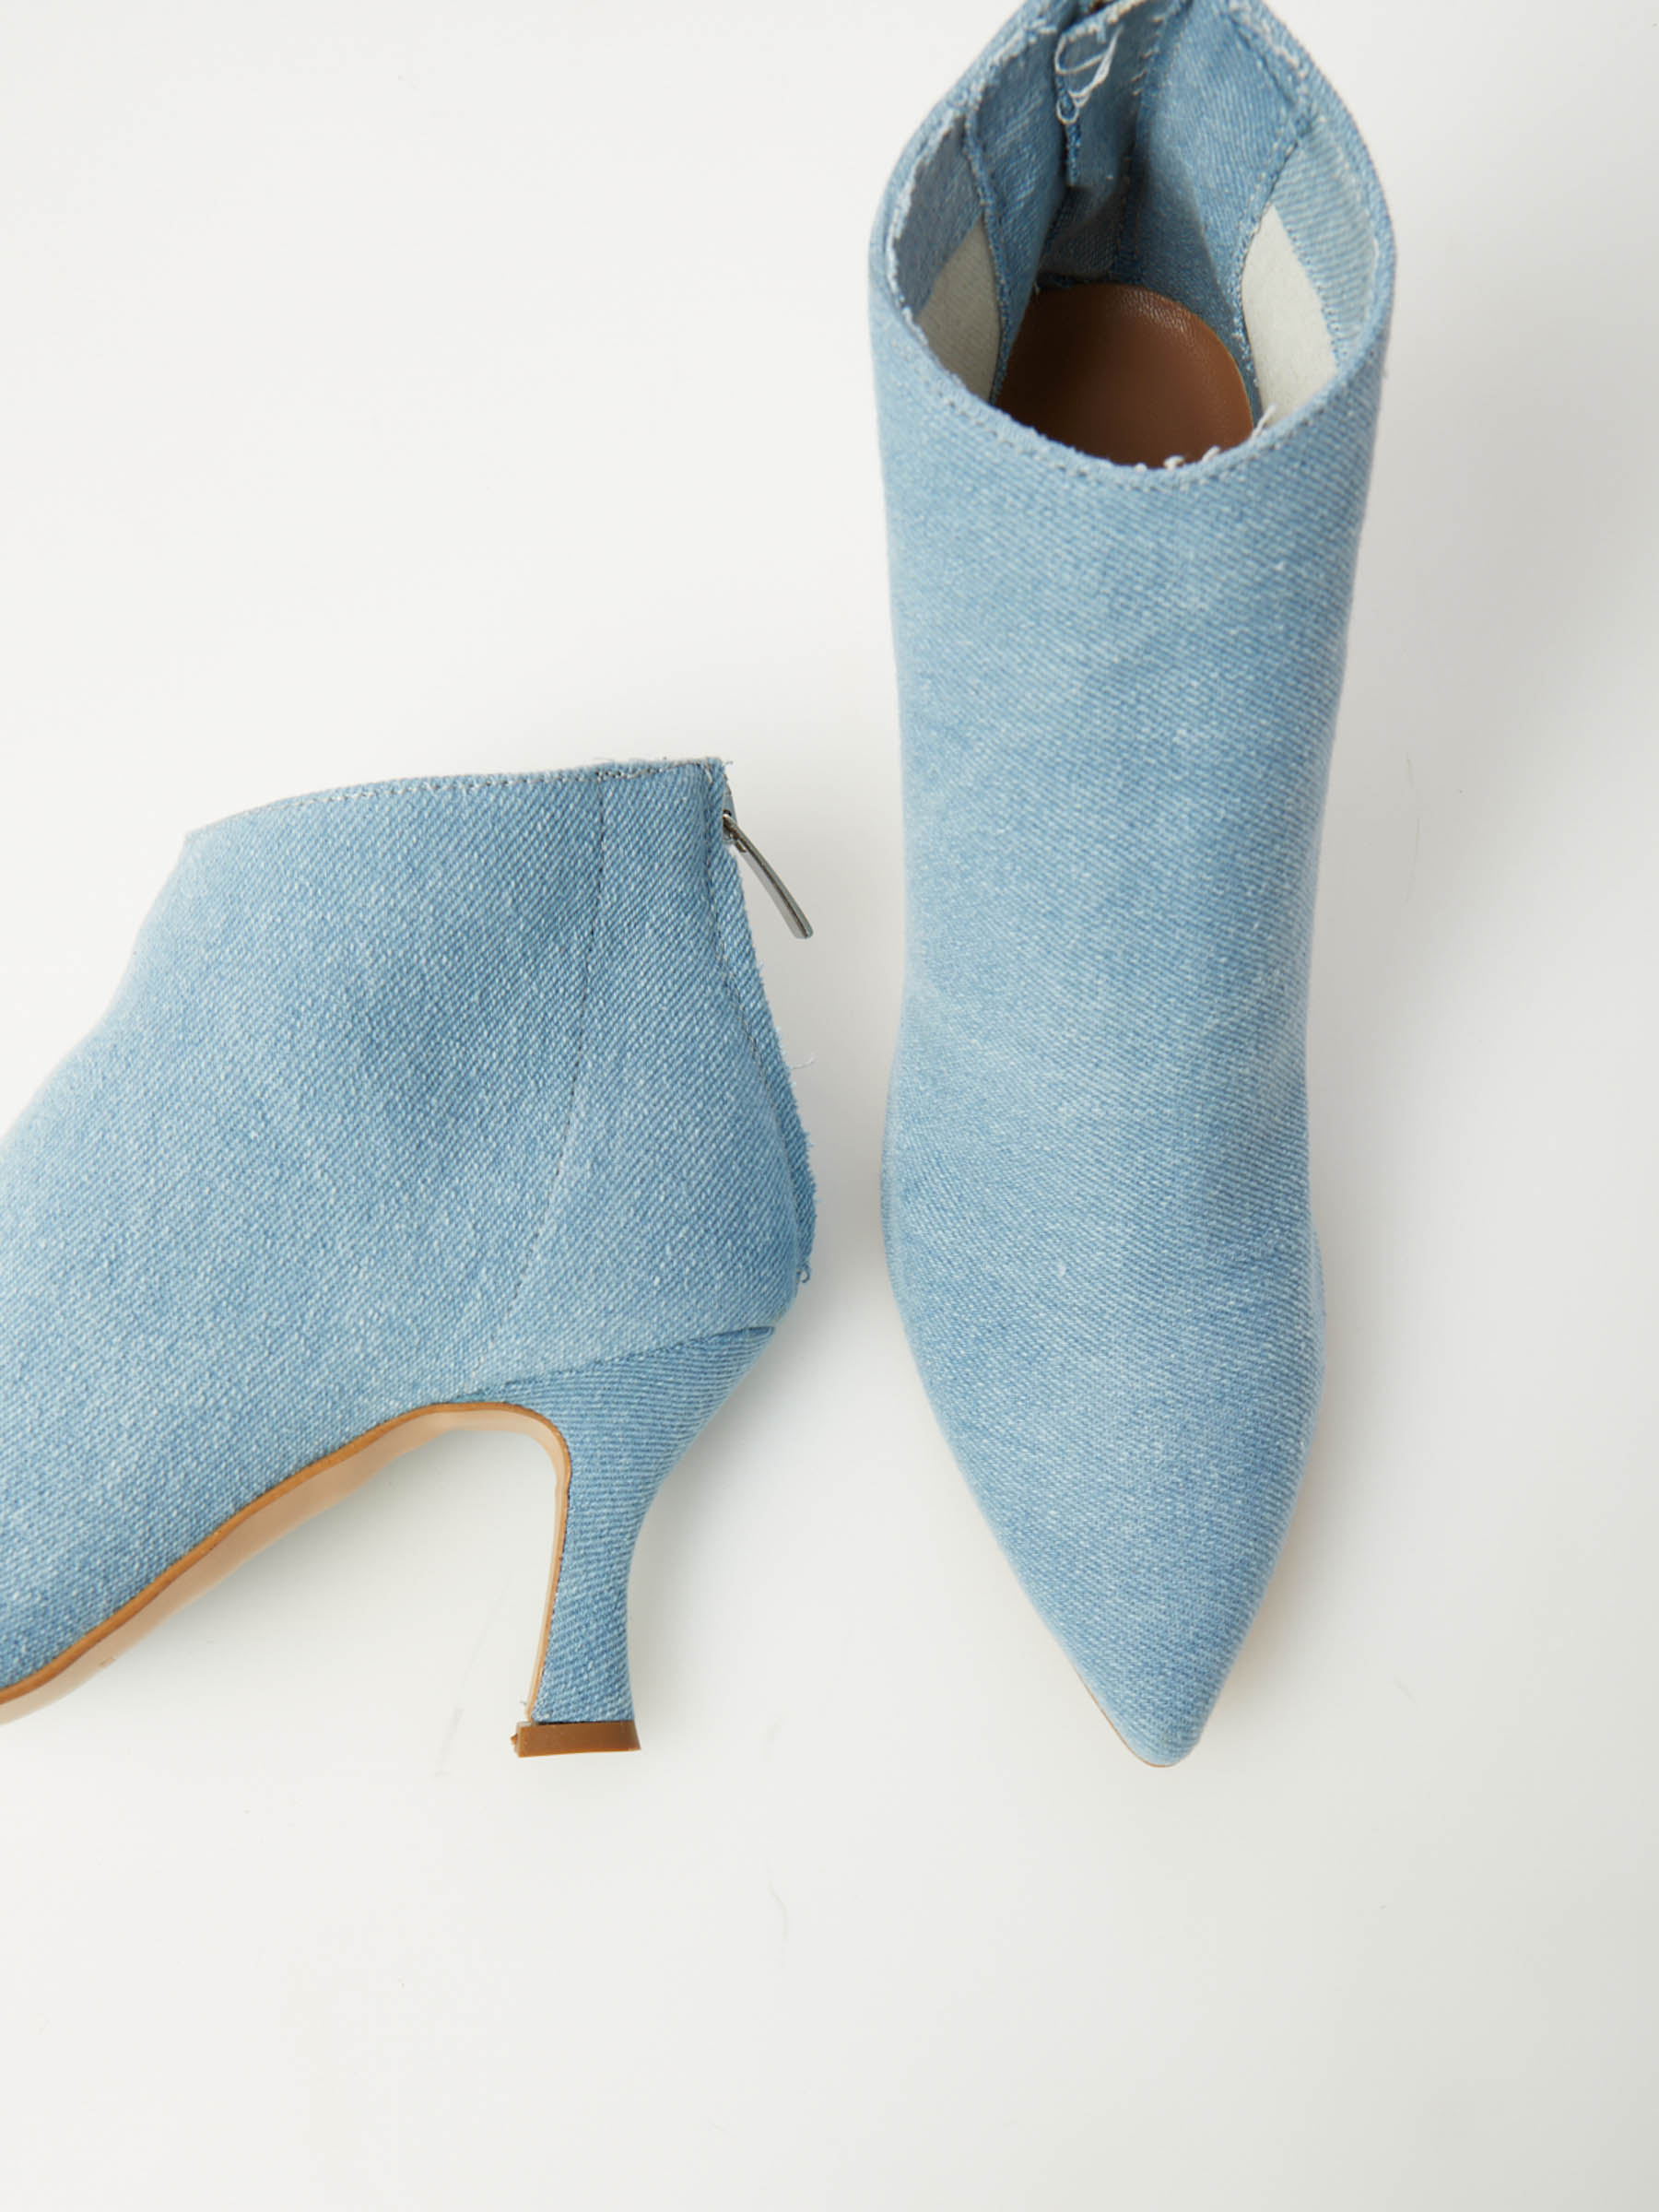 Jeans Ankle Boots Carlotta